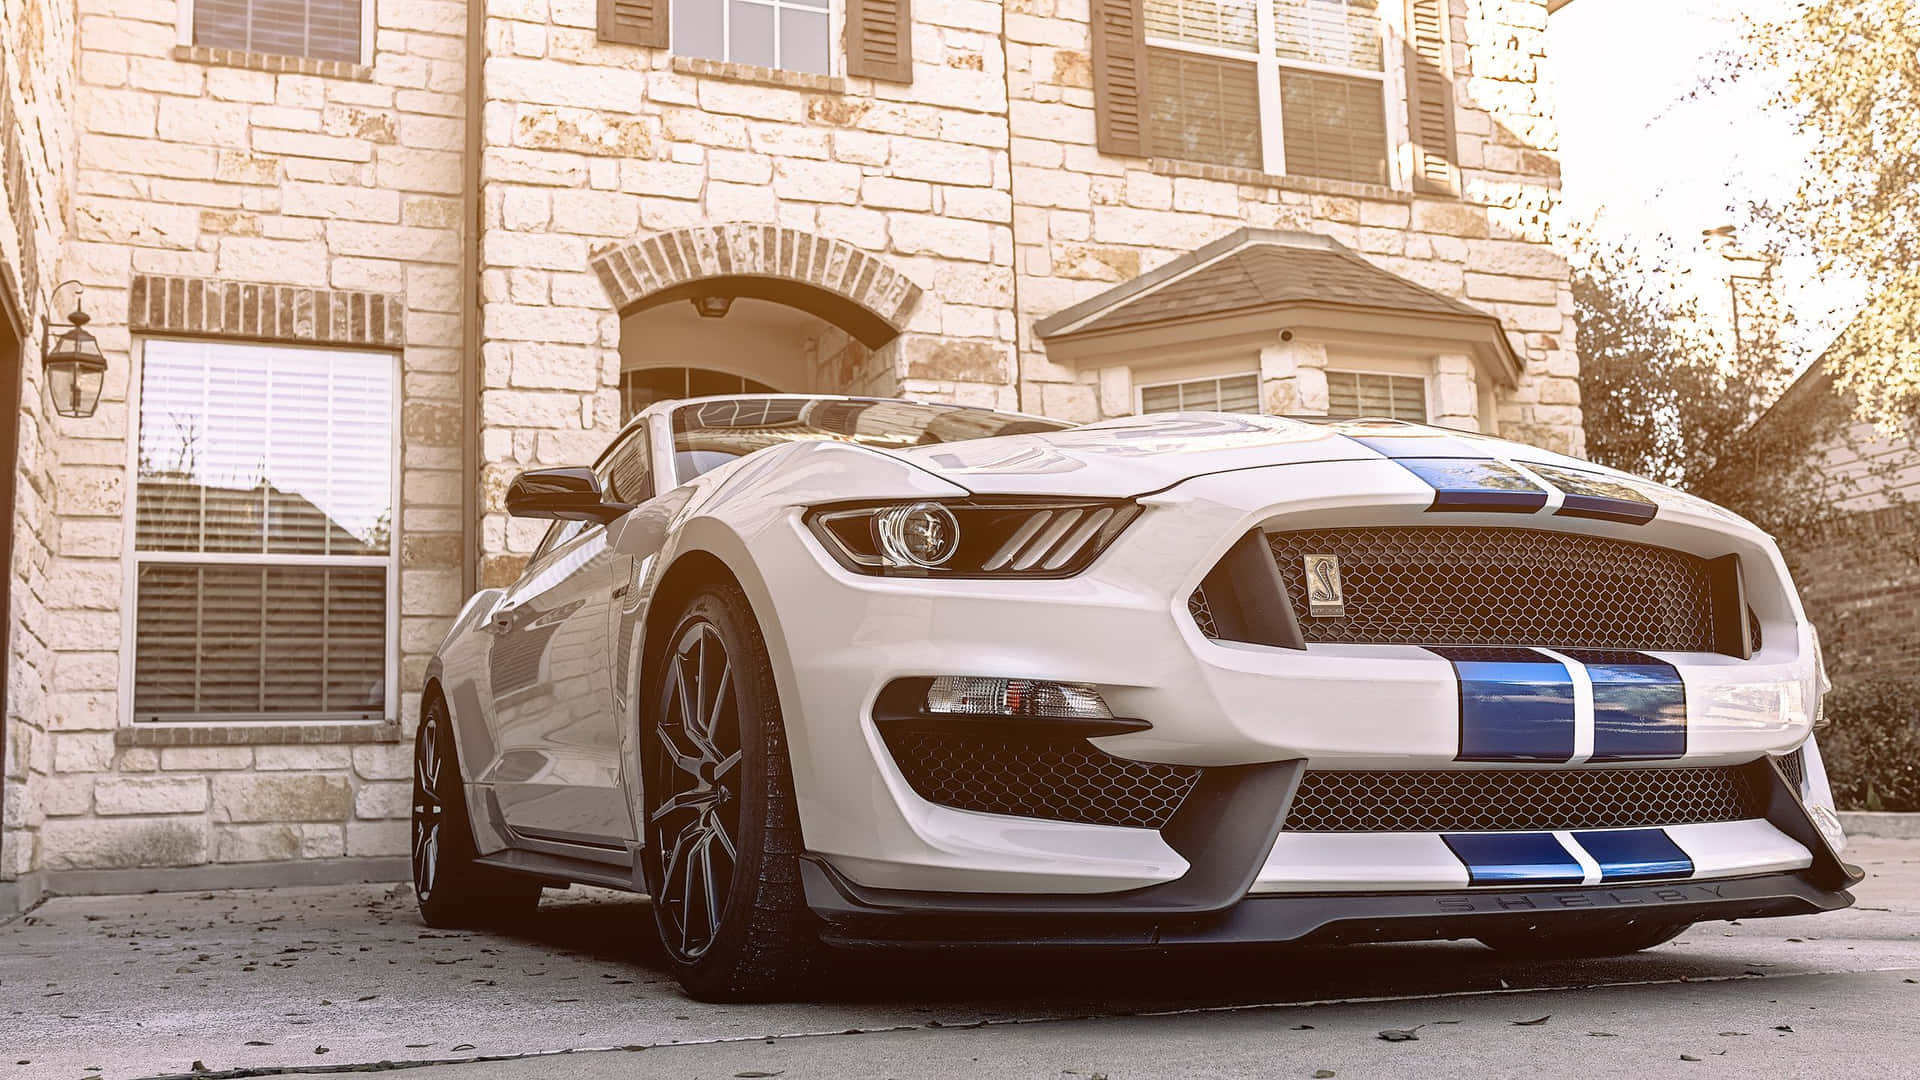 Sleek and Refined Ford Mustang Shelby GT350 Wallpaper